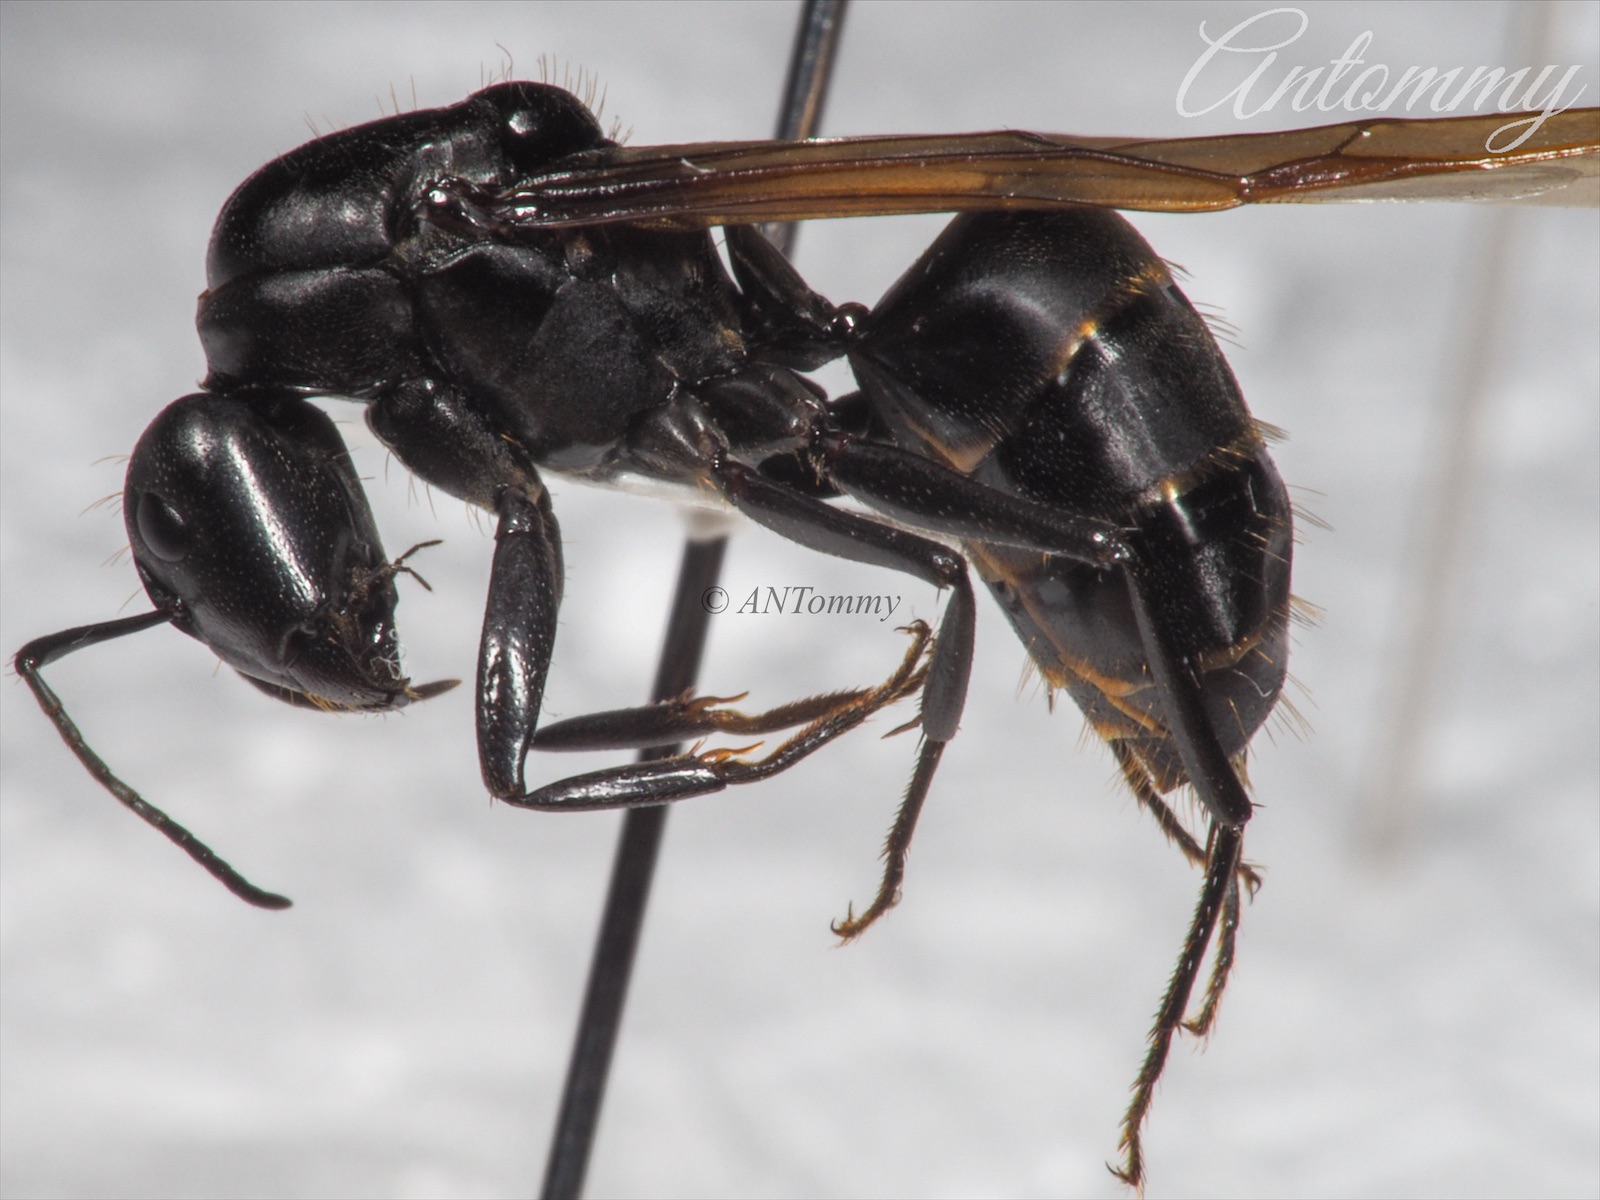 Big Black Ant Camponotus japonicas in clear Block Education Insect Specimen 